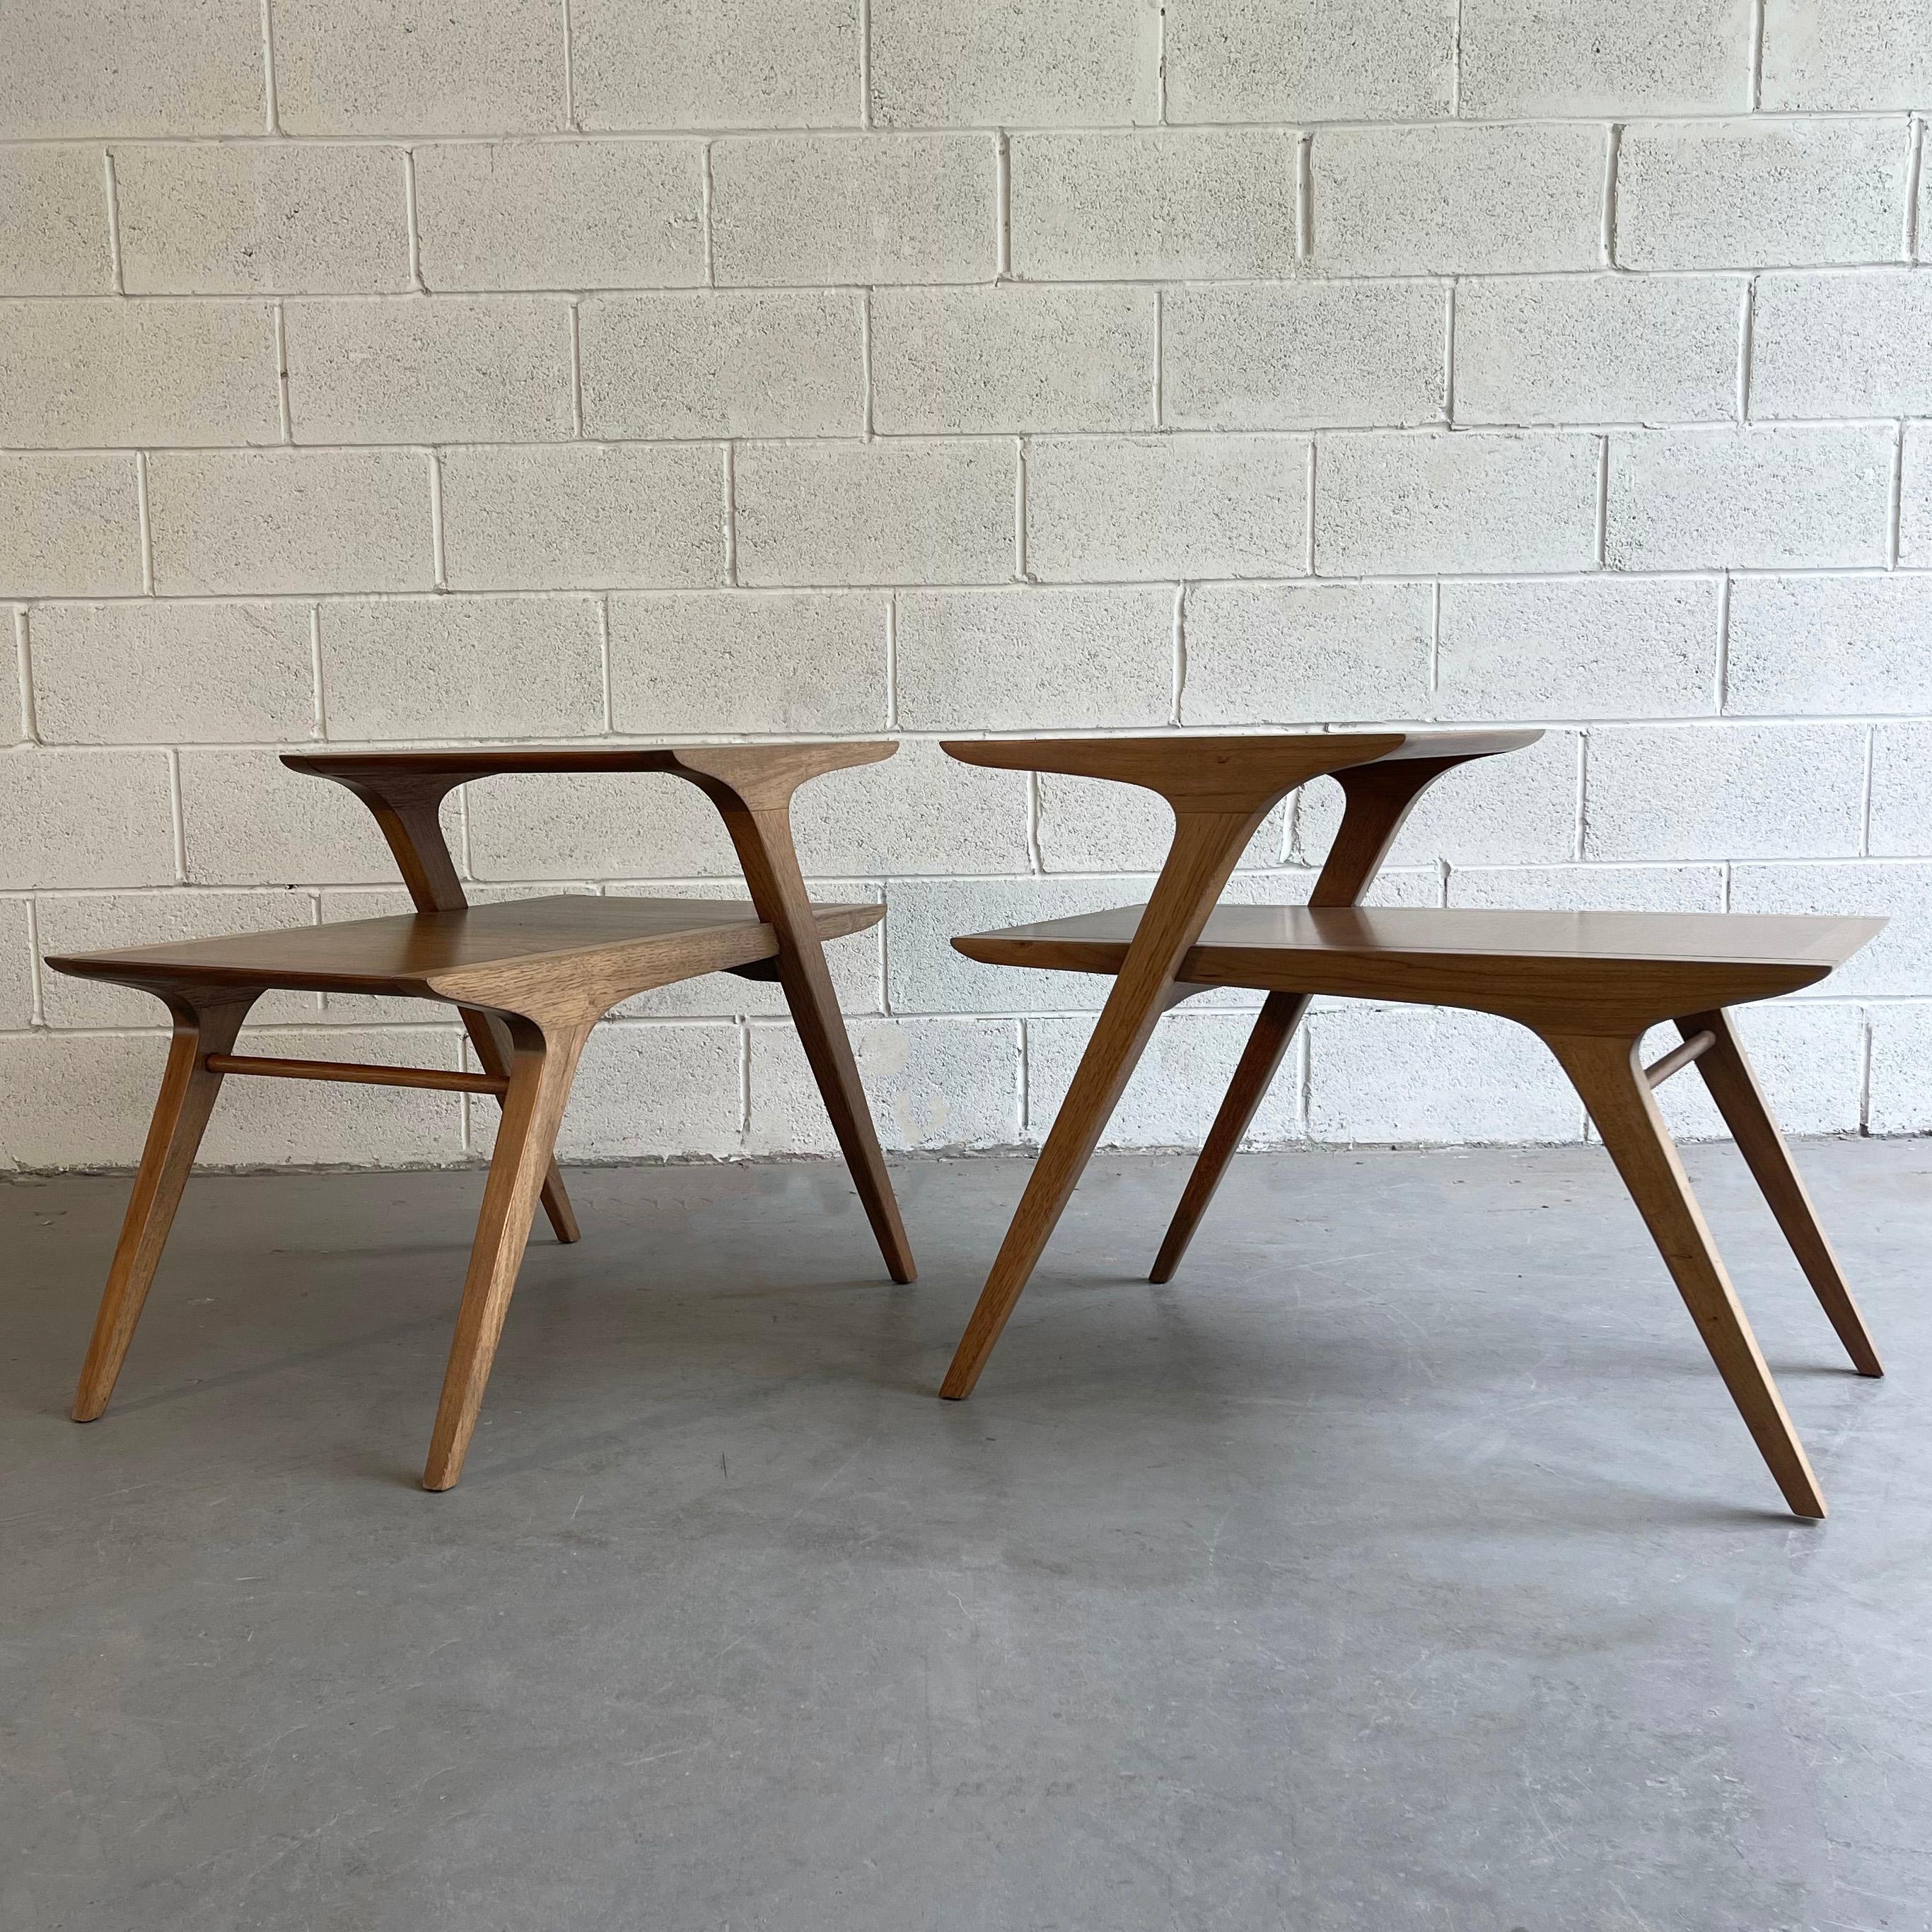 Pair of Mid-Century Modern, ash, step end tables by John Van Koert for Drexel feature exceptional lines and contrasting wood grain. The lower table is 17 inches height and the upper level is 17 inches deep.